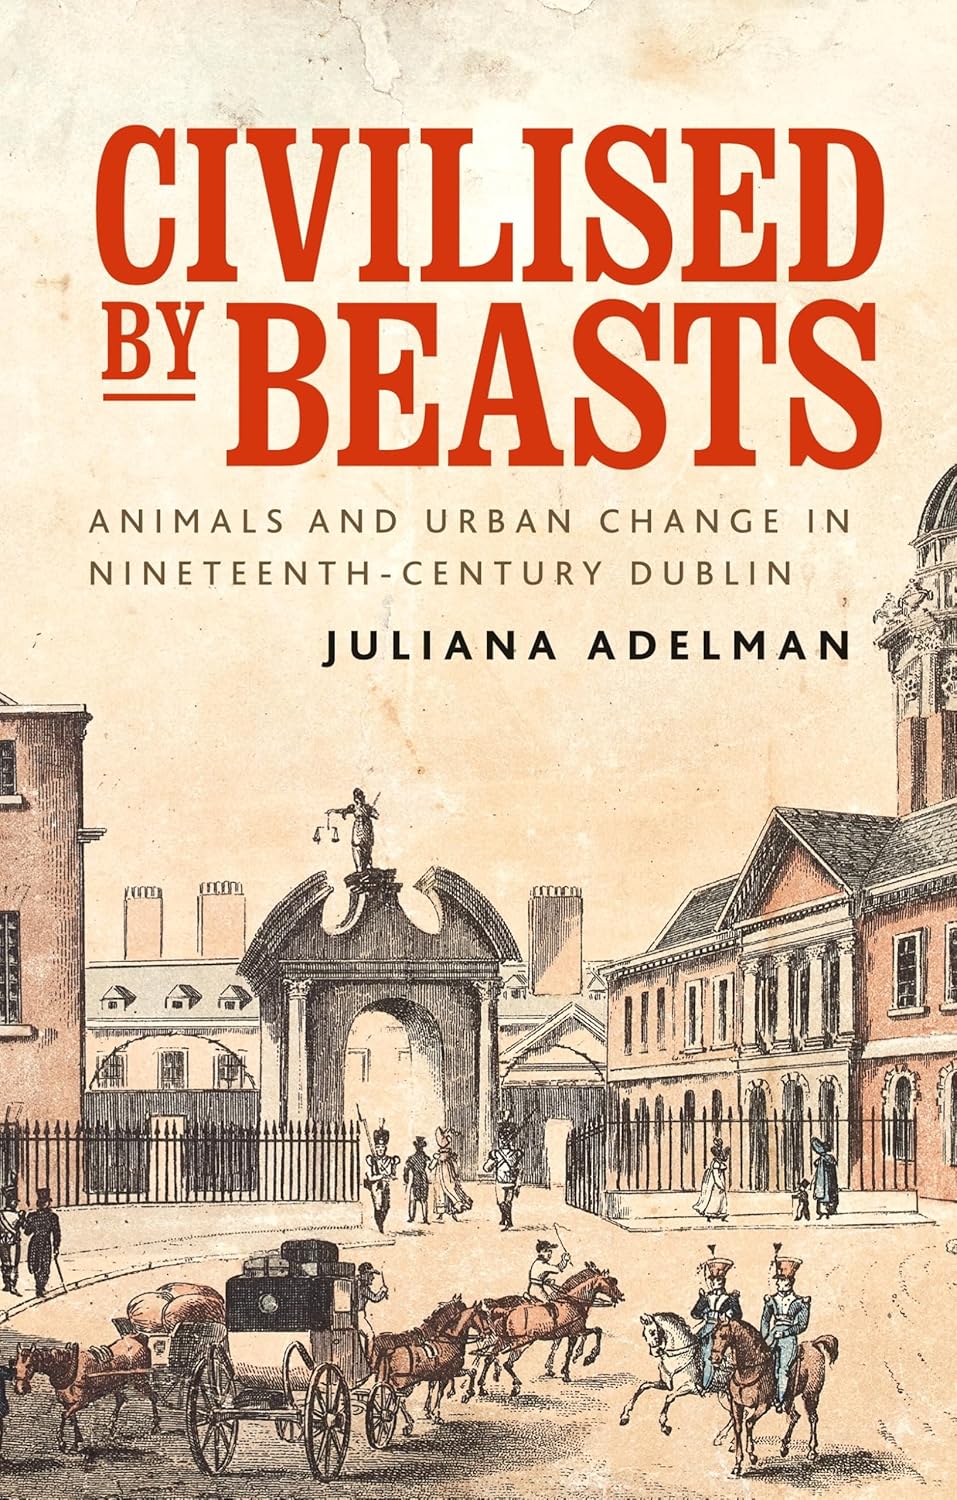 Civilised by beasts : animals and urban change in nineteenth-century Dublin